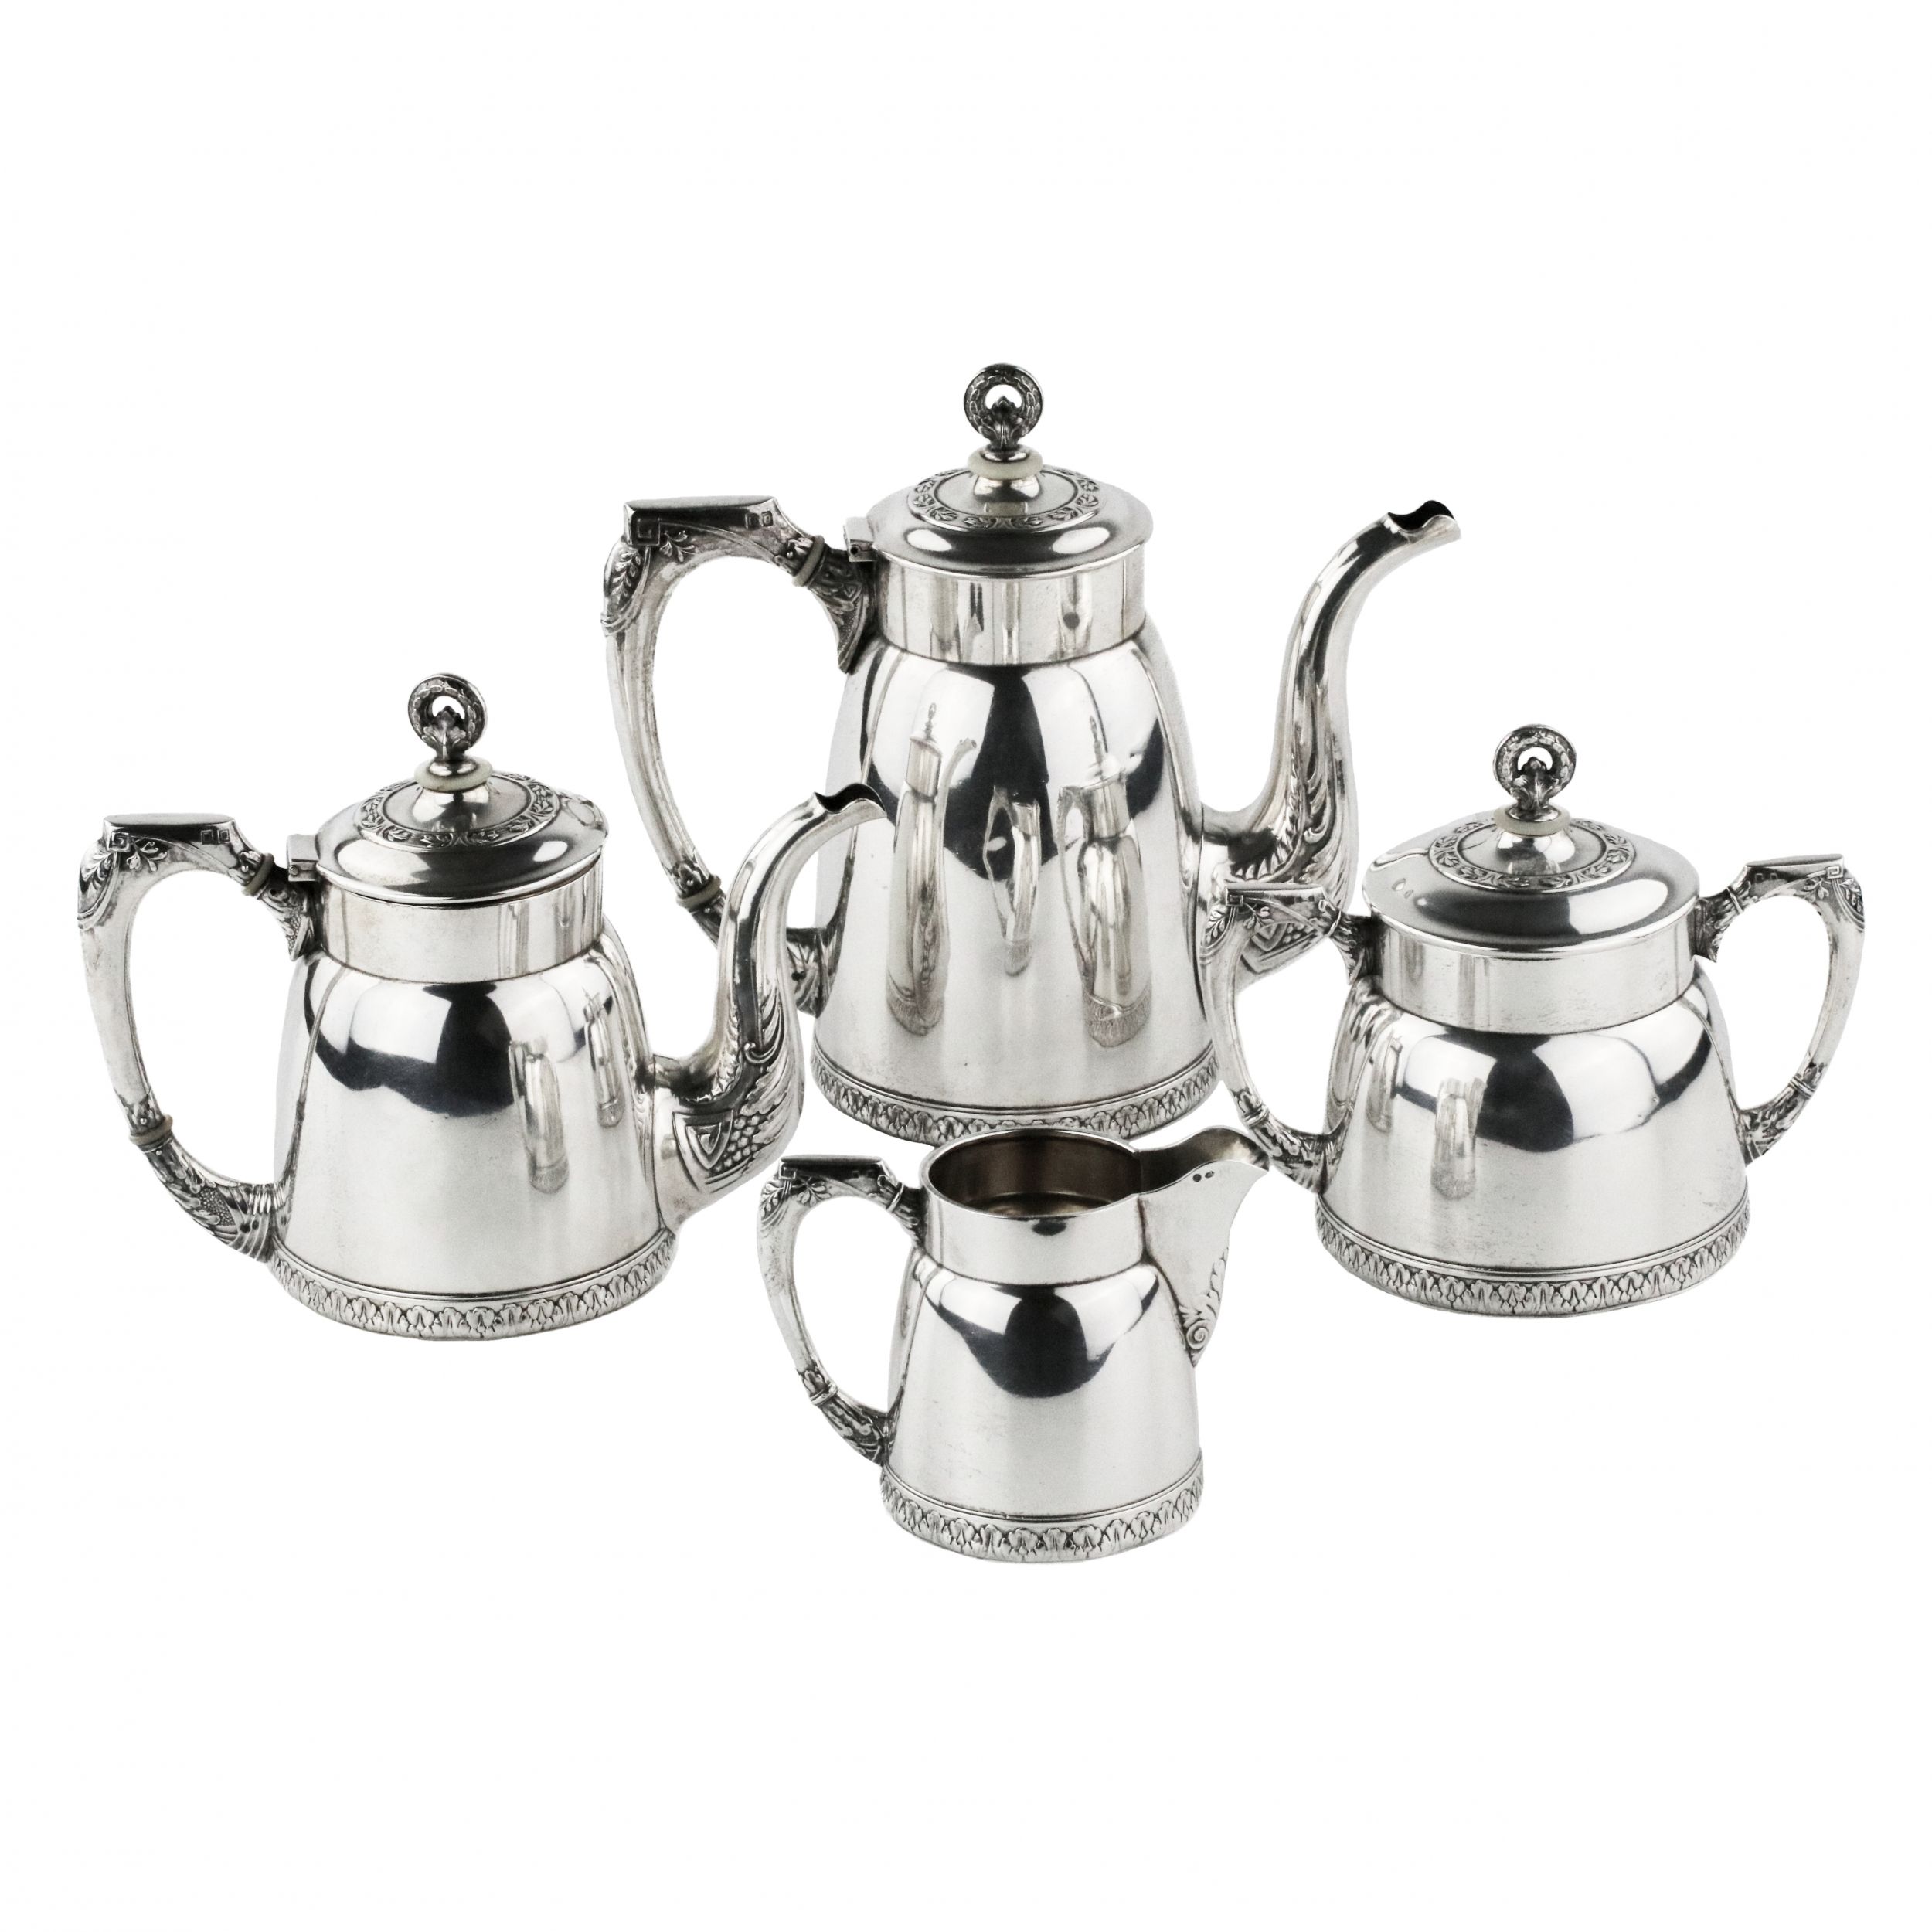 Russian-silver-tea-and-coffee-service-2nd-Moscow-Artel-1908-1917-